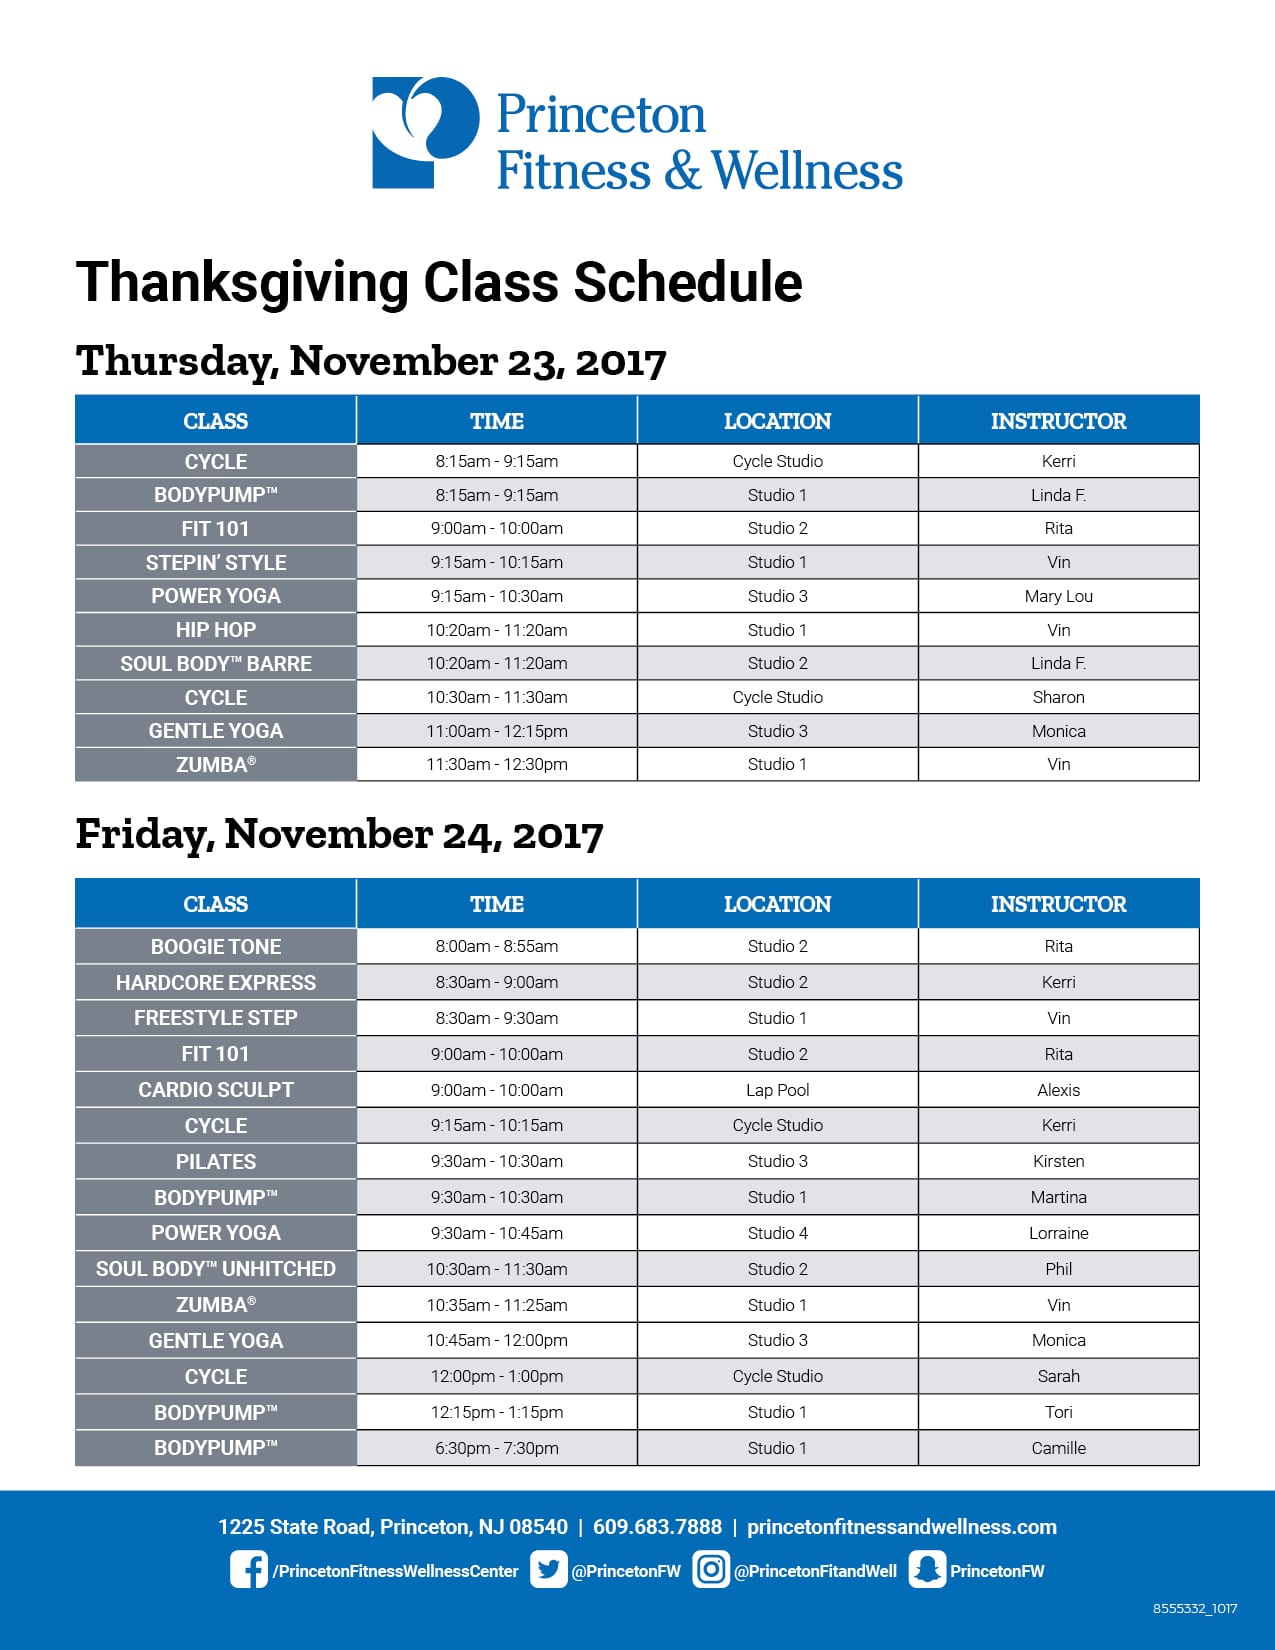 Princeton Thanksgiving 2017 Holiday Hours & Group Fitness Schedule